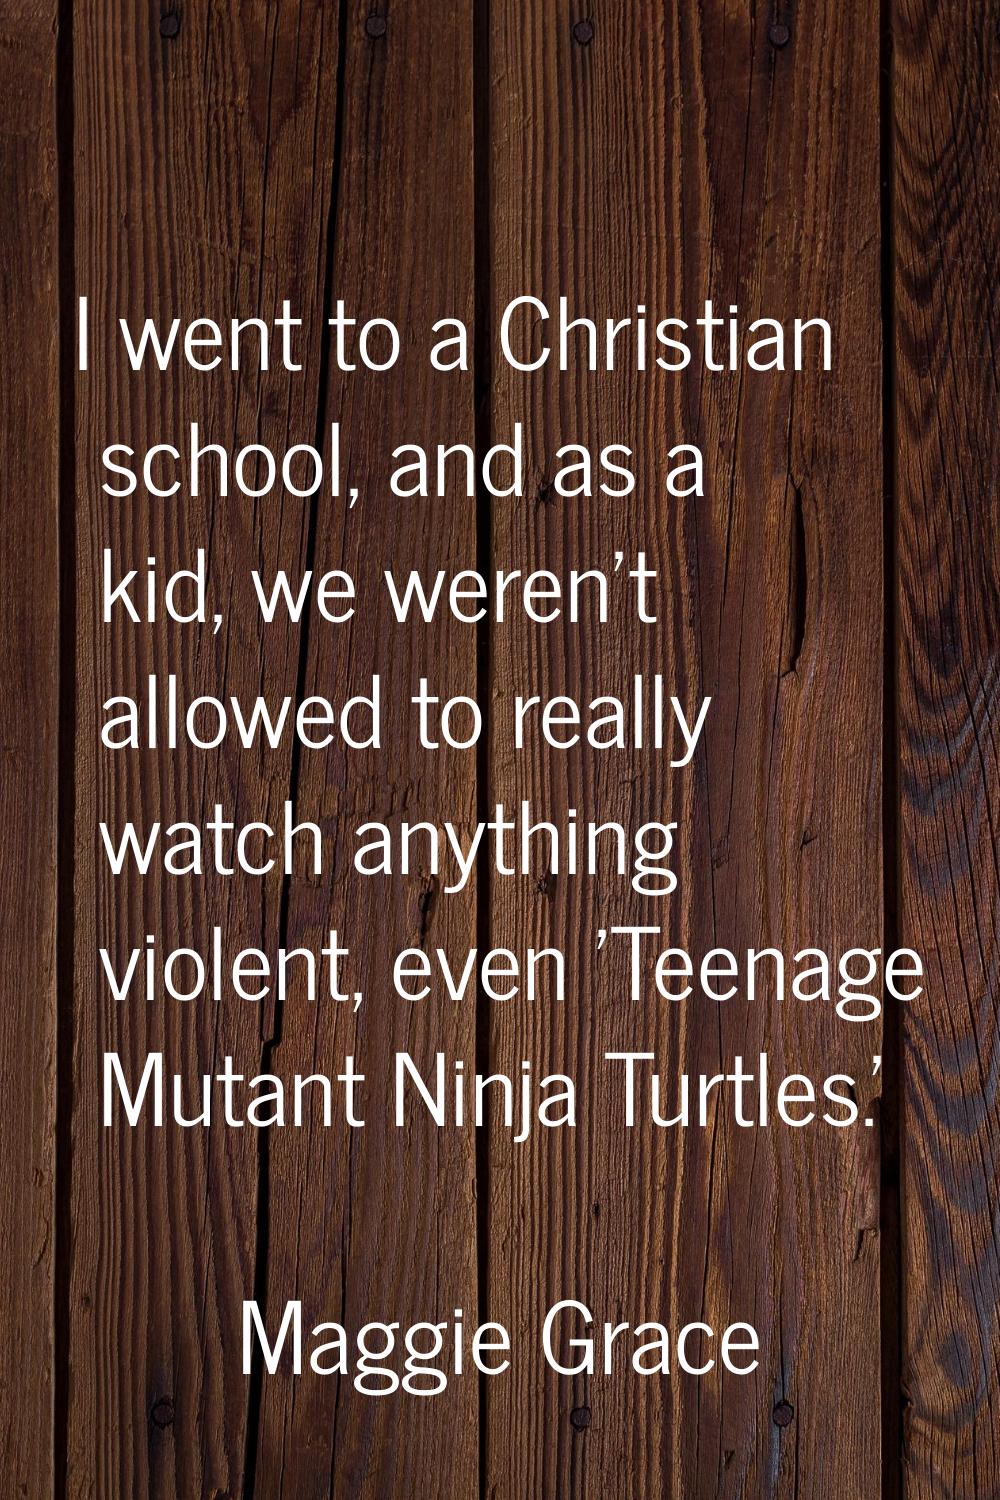 I went to a Christian school, and as a kid, we weren't allowed to really watch anything violent, ev